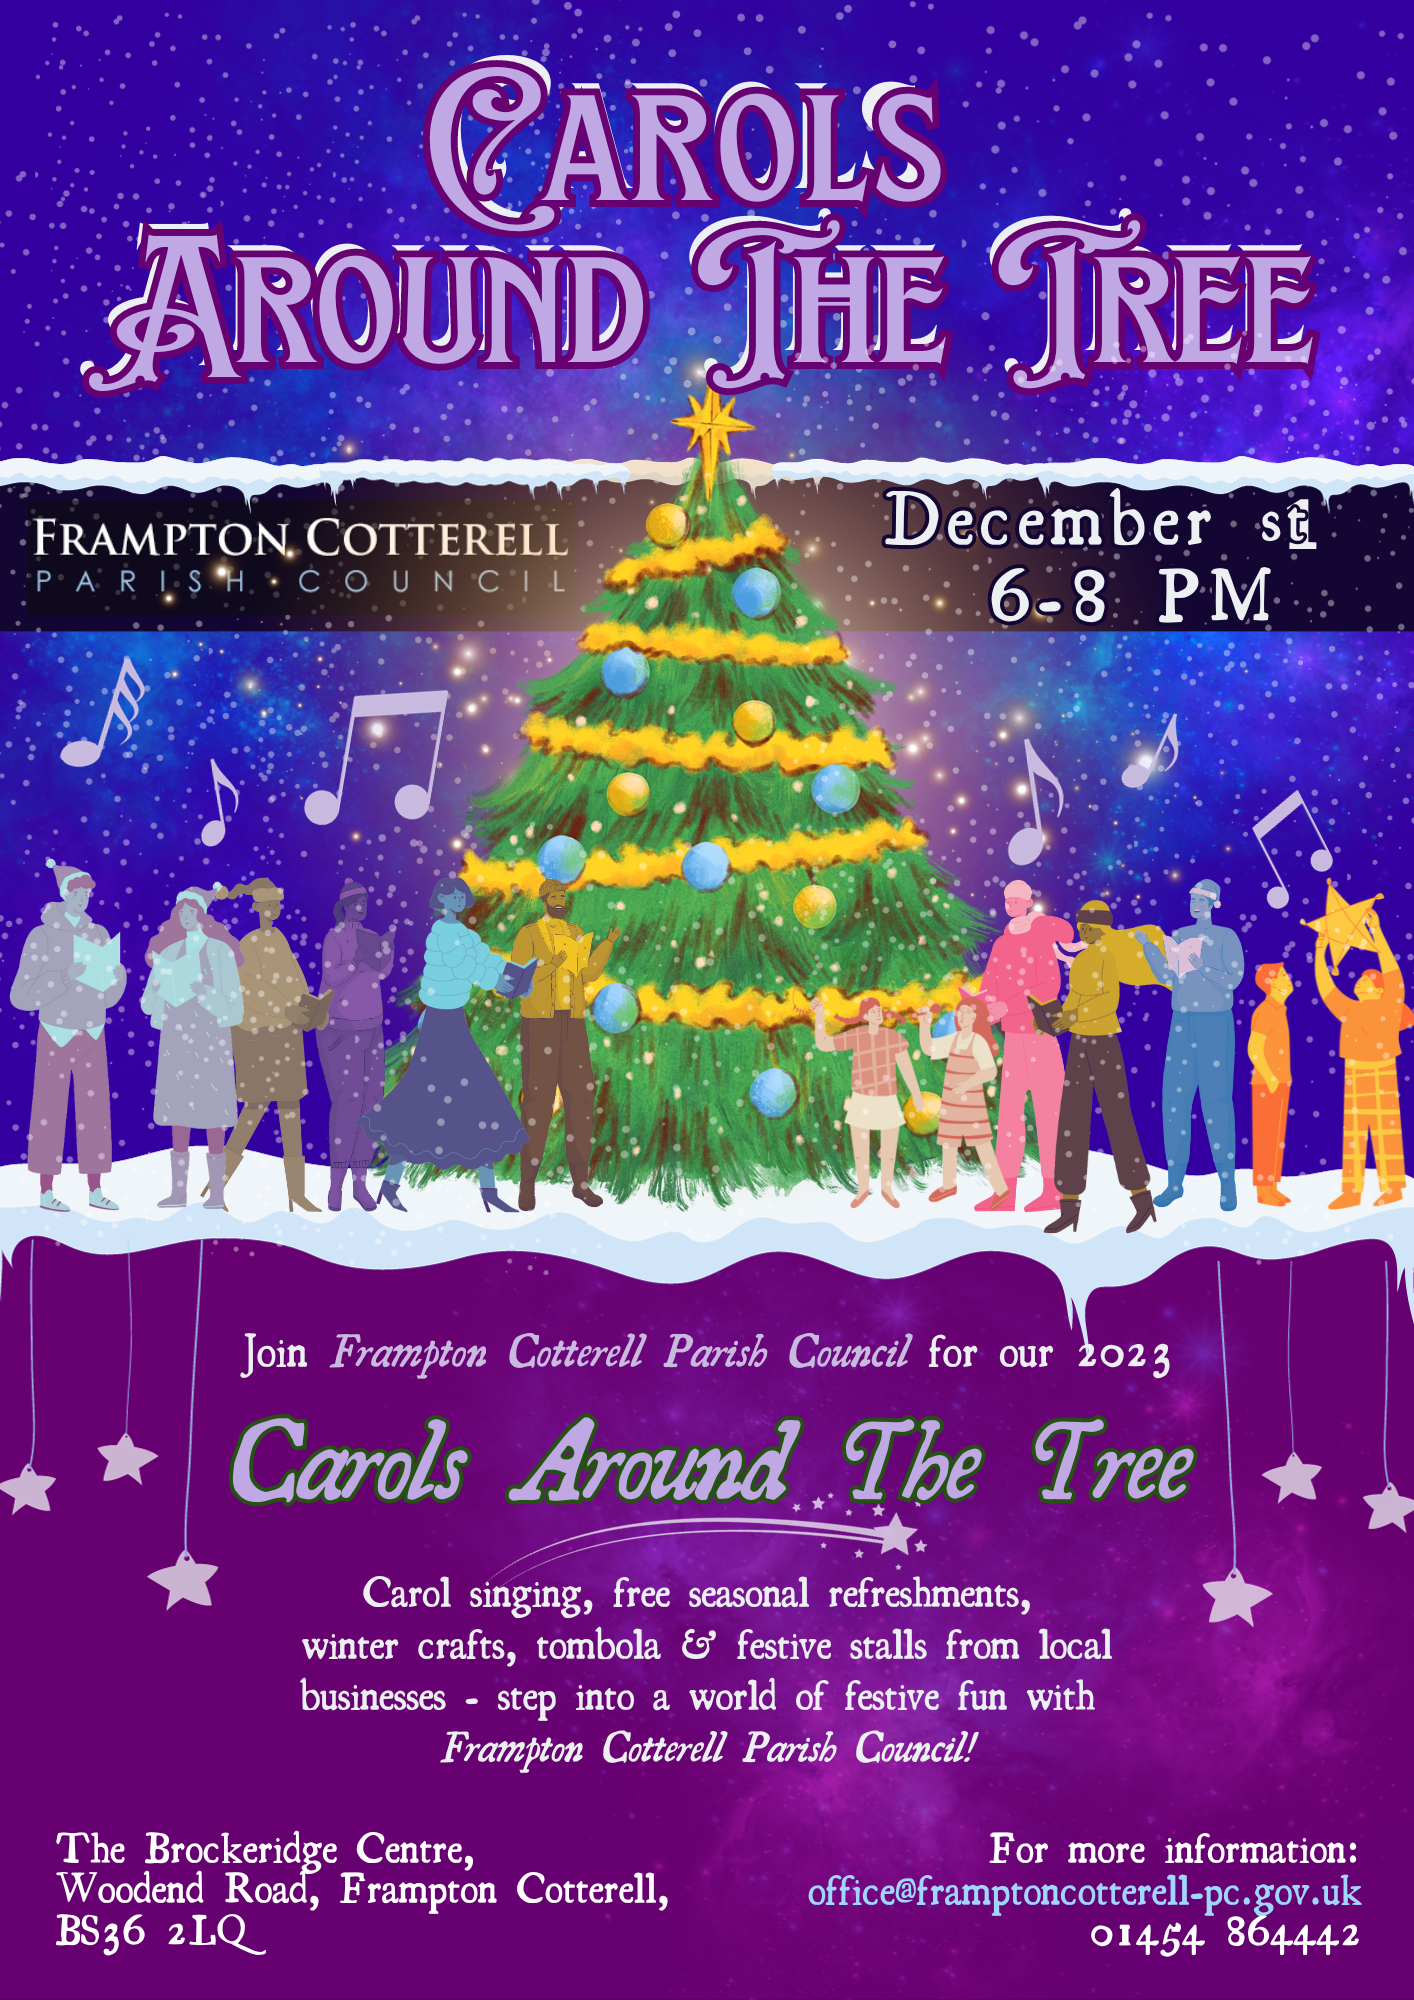 Carols Around the Tree. Frampton Cotterell Parish Council. December 1st, 6-8PM. Join Frampton Cotterell Parish Council for our 2023 Carols Around The Tree. Carol singing, free seasonal refreshments, winter crafts, tombola & festive stalls from local businesses - step into a world of festive fun with Frampton Cotterell Parish Council! The Brockeridge Centre, Woodend Road, Frampton Cotterell, BS36 2LQ. For more information: office@framptoncotterell-pc.gov.uk 01454 86444. This text over an illustration of a large, decorated, brightly lit up christmas tree surrounded by stylised images of a group of adults and children. Music notes are above their heads. It is lightly snowing. The sky is deep blue and peppered with silvery stars and faint blue and purple nebulae. The bottom half of the poster is deep purple with lilac and silver text, decorated with a few lilac hanging stars and a gentle purple nebula. 